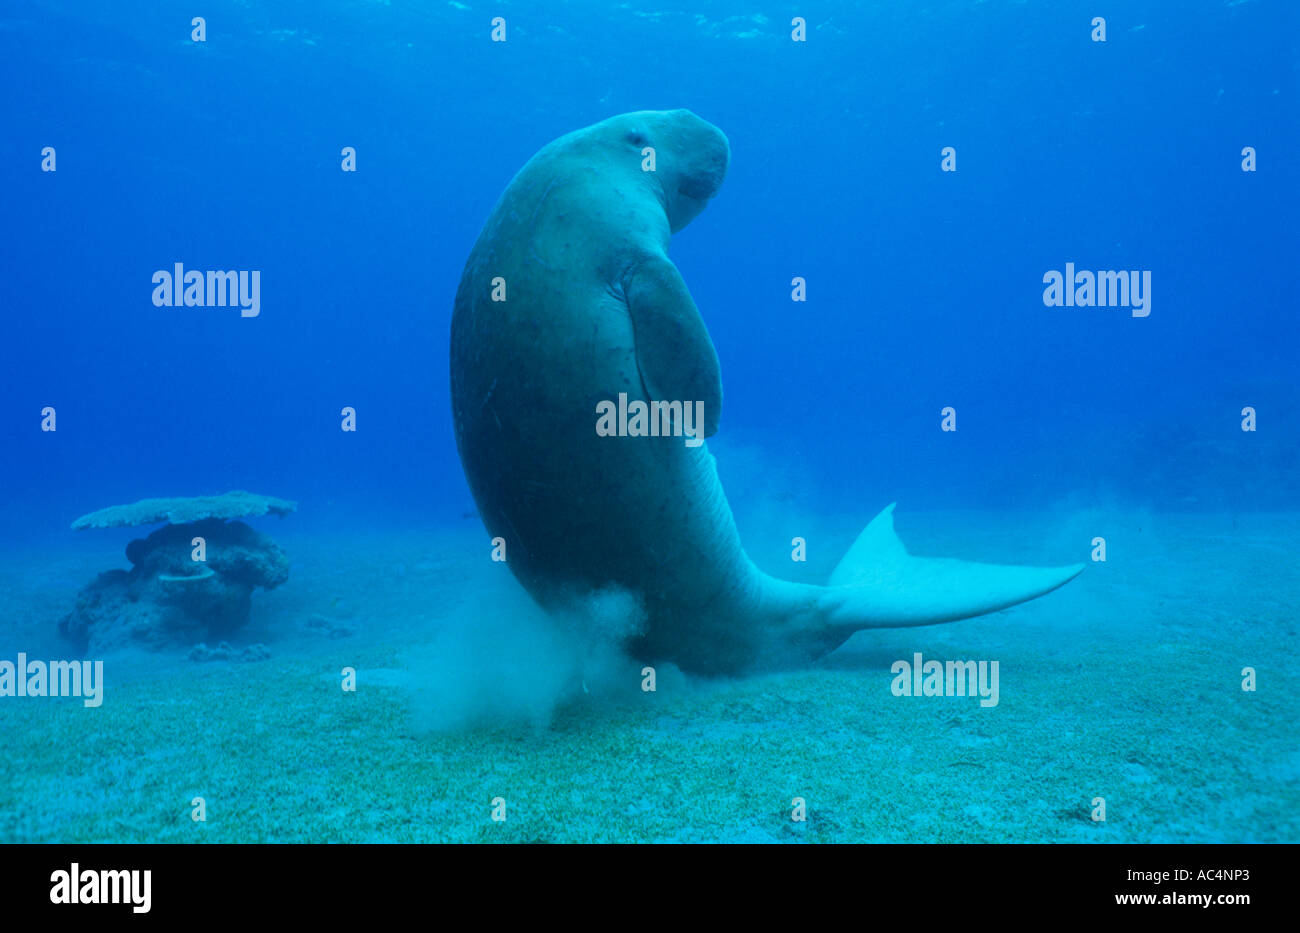 Dugong endangered marine mammal occurs in the Indo Pacific oceans.  Related to the manatee. Source of mermaid legend. Stock Photo